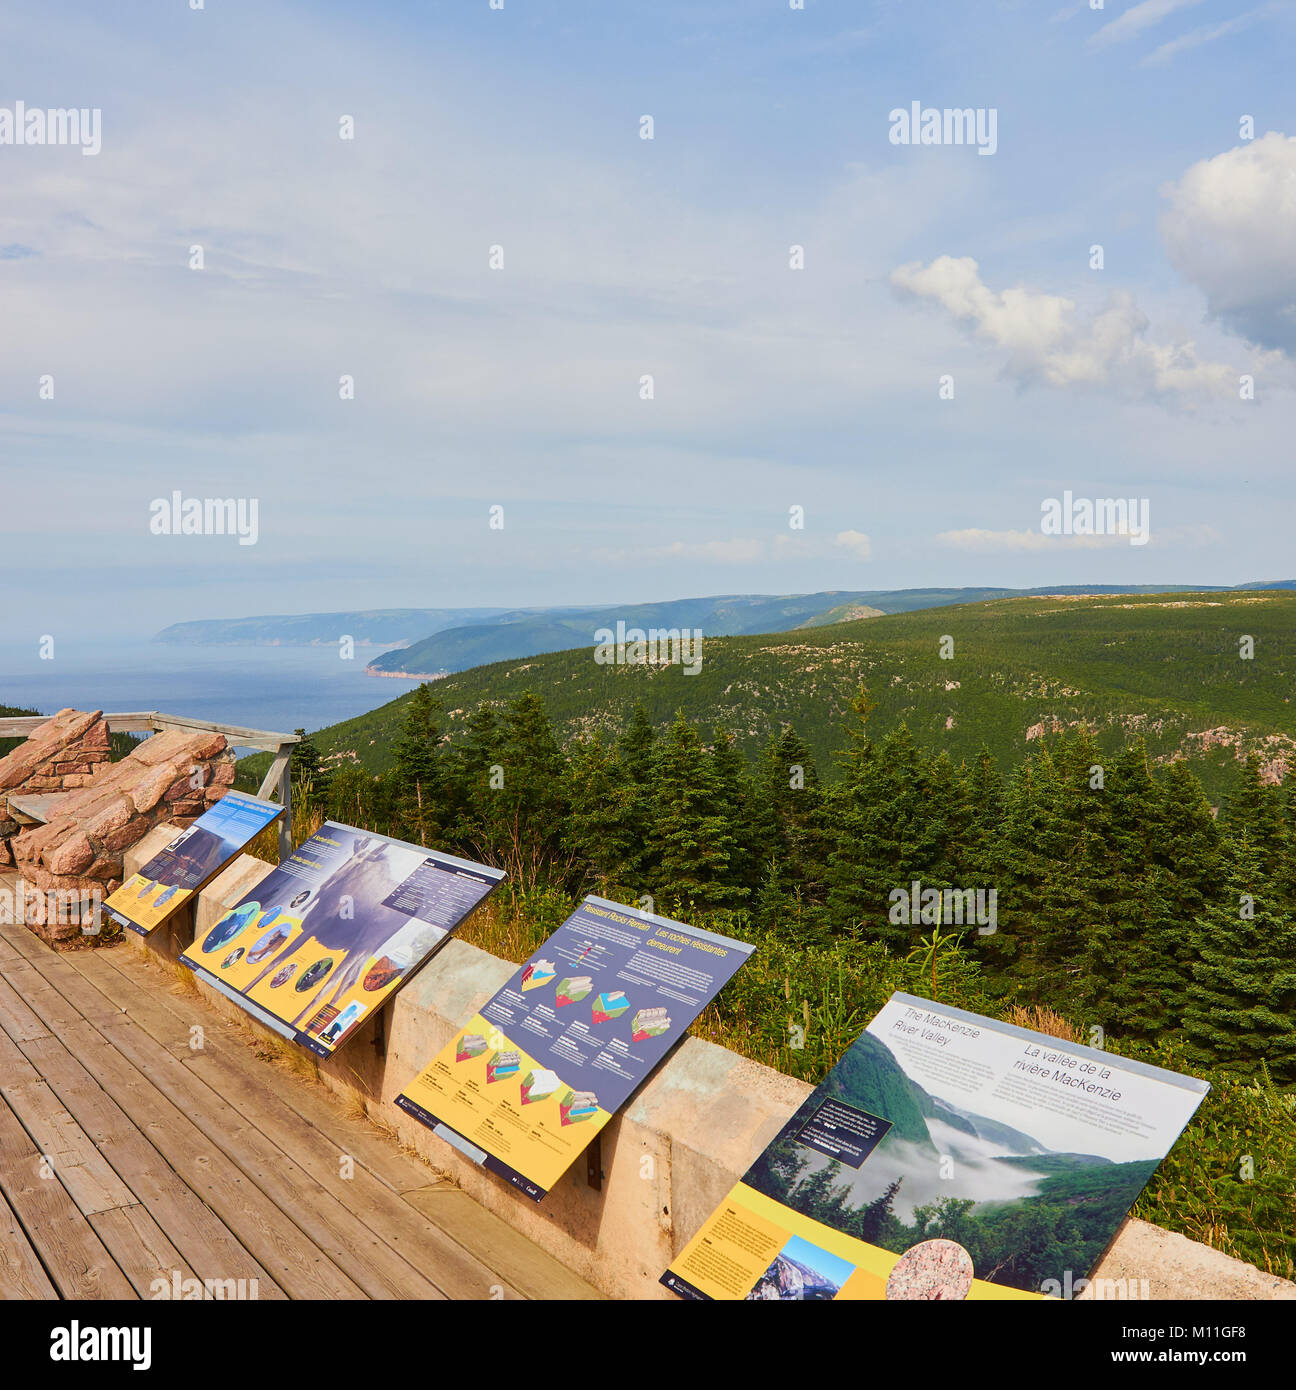 Viewing platform with information boards for visitors in the Cape Breton Highlands National Park, Cape Breton Island, Nova Scotia, Canada Stock Photo